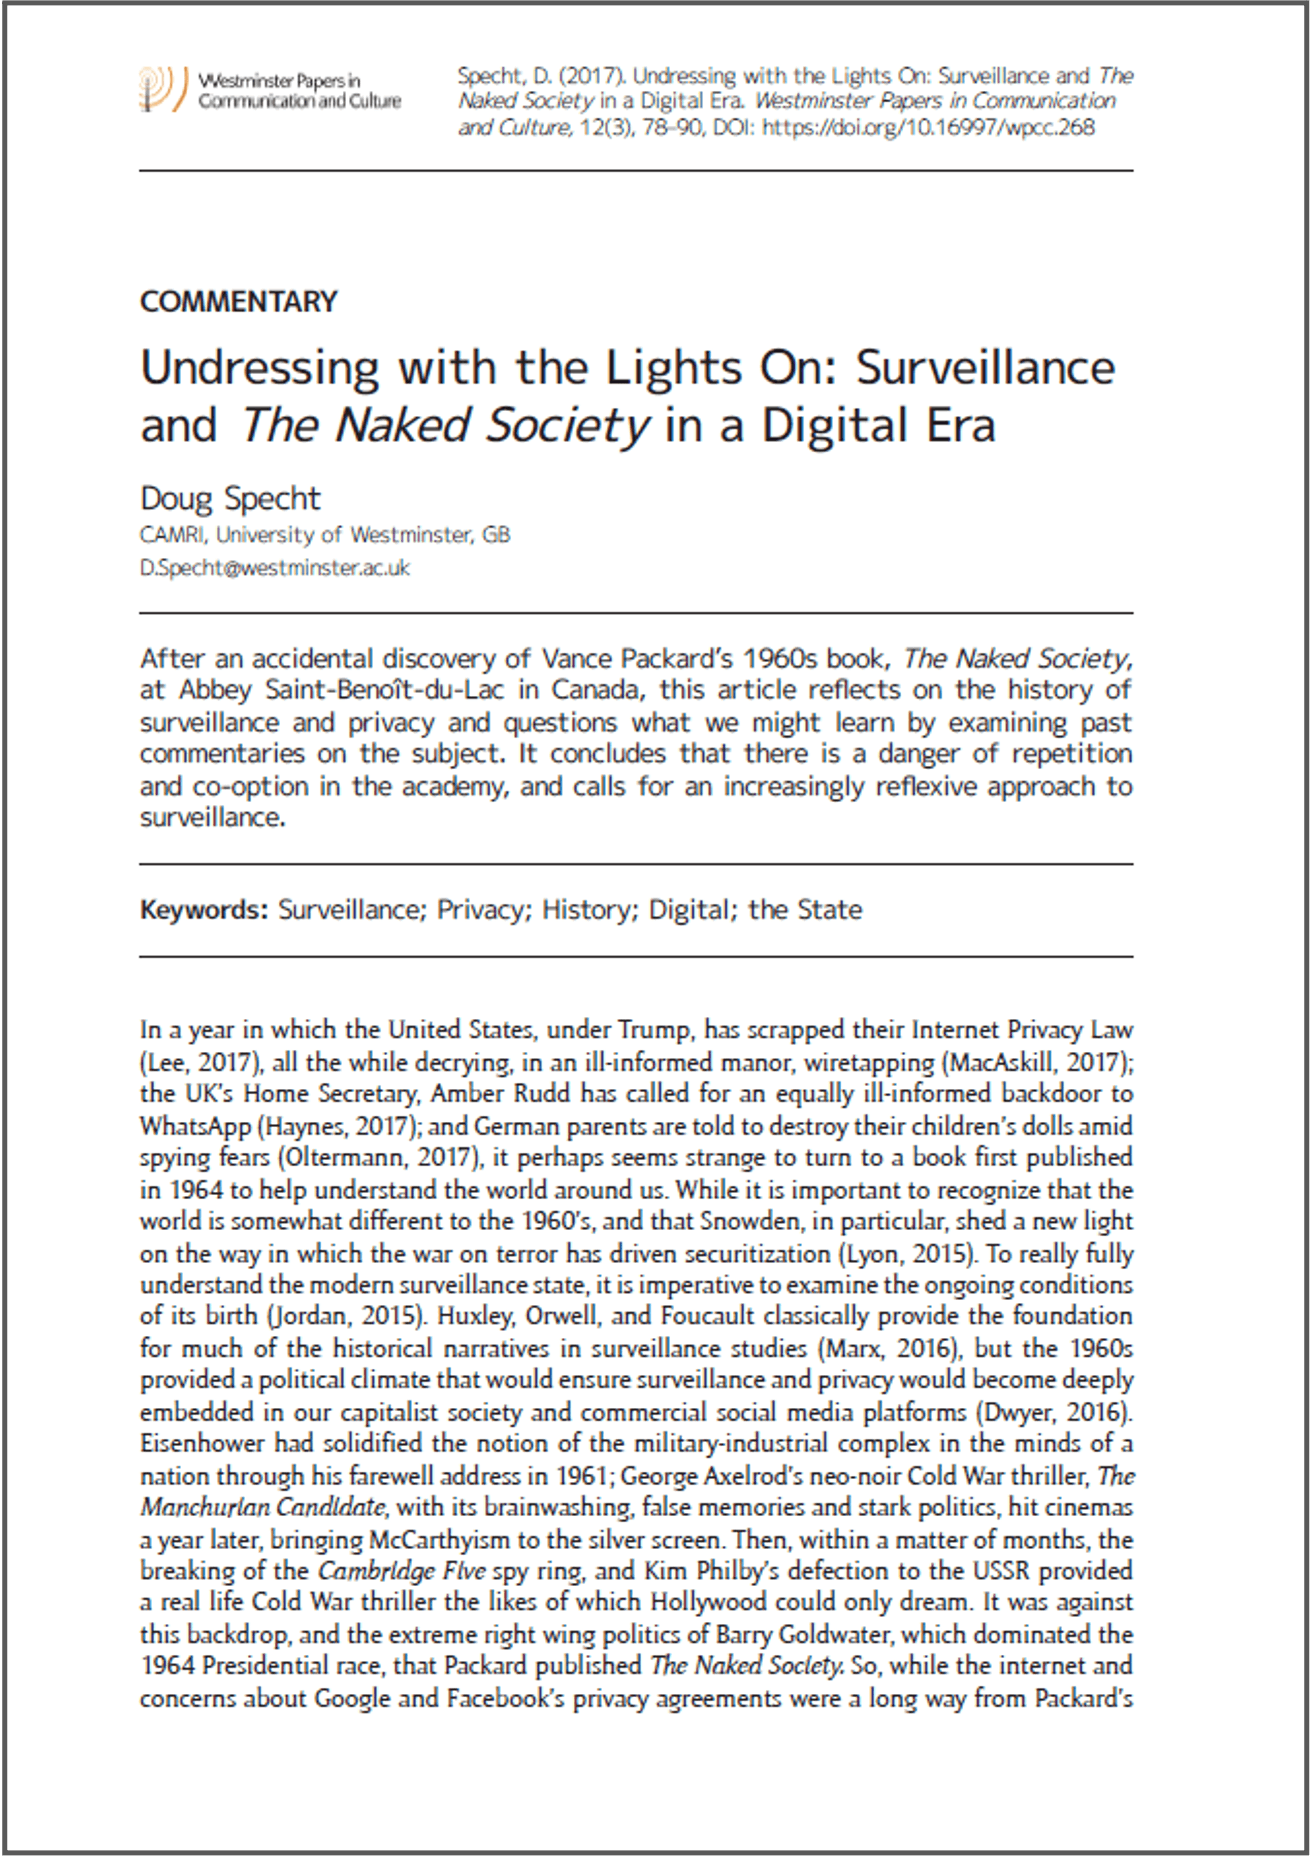 Undressing with the Lights On: Surveillance and The Naked Society in a Digital Era